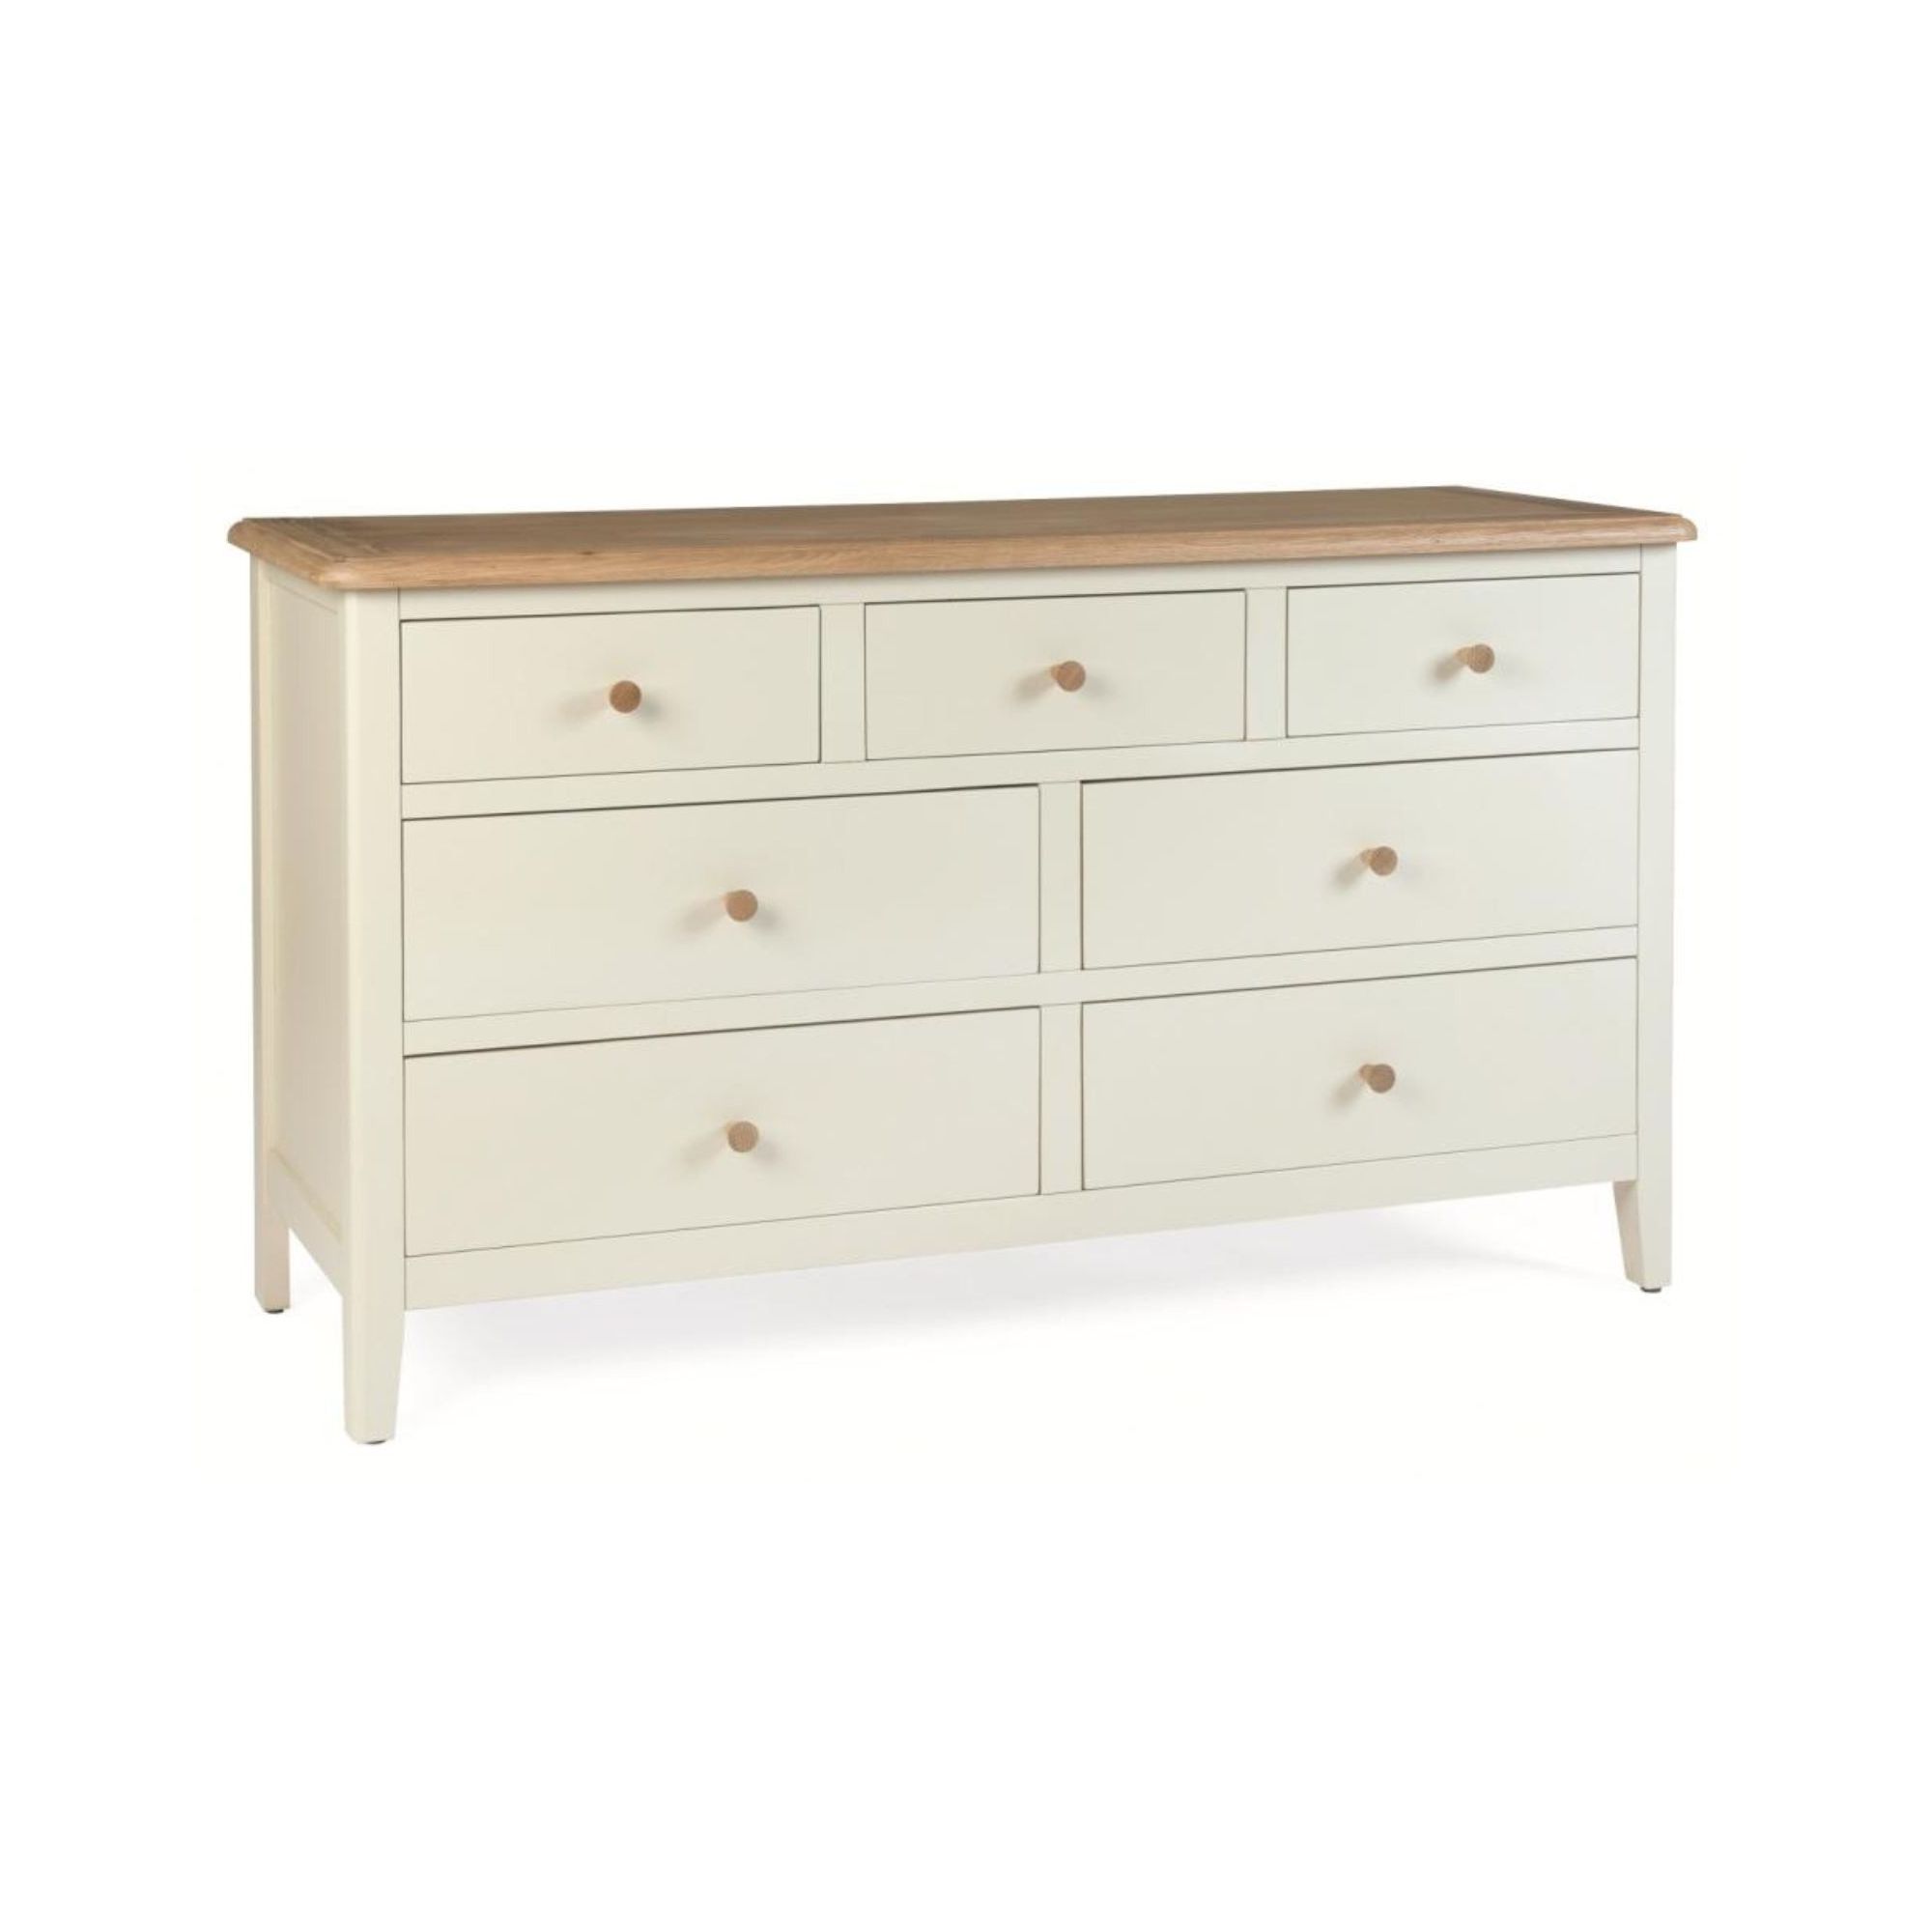 Kelburn Furniture Cottage Painted 7 Drawer Chest at Tesco Direct